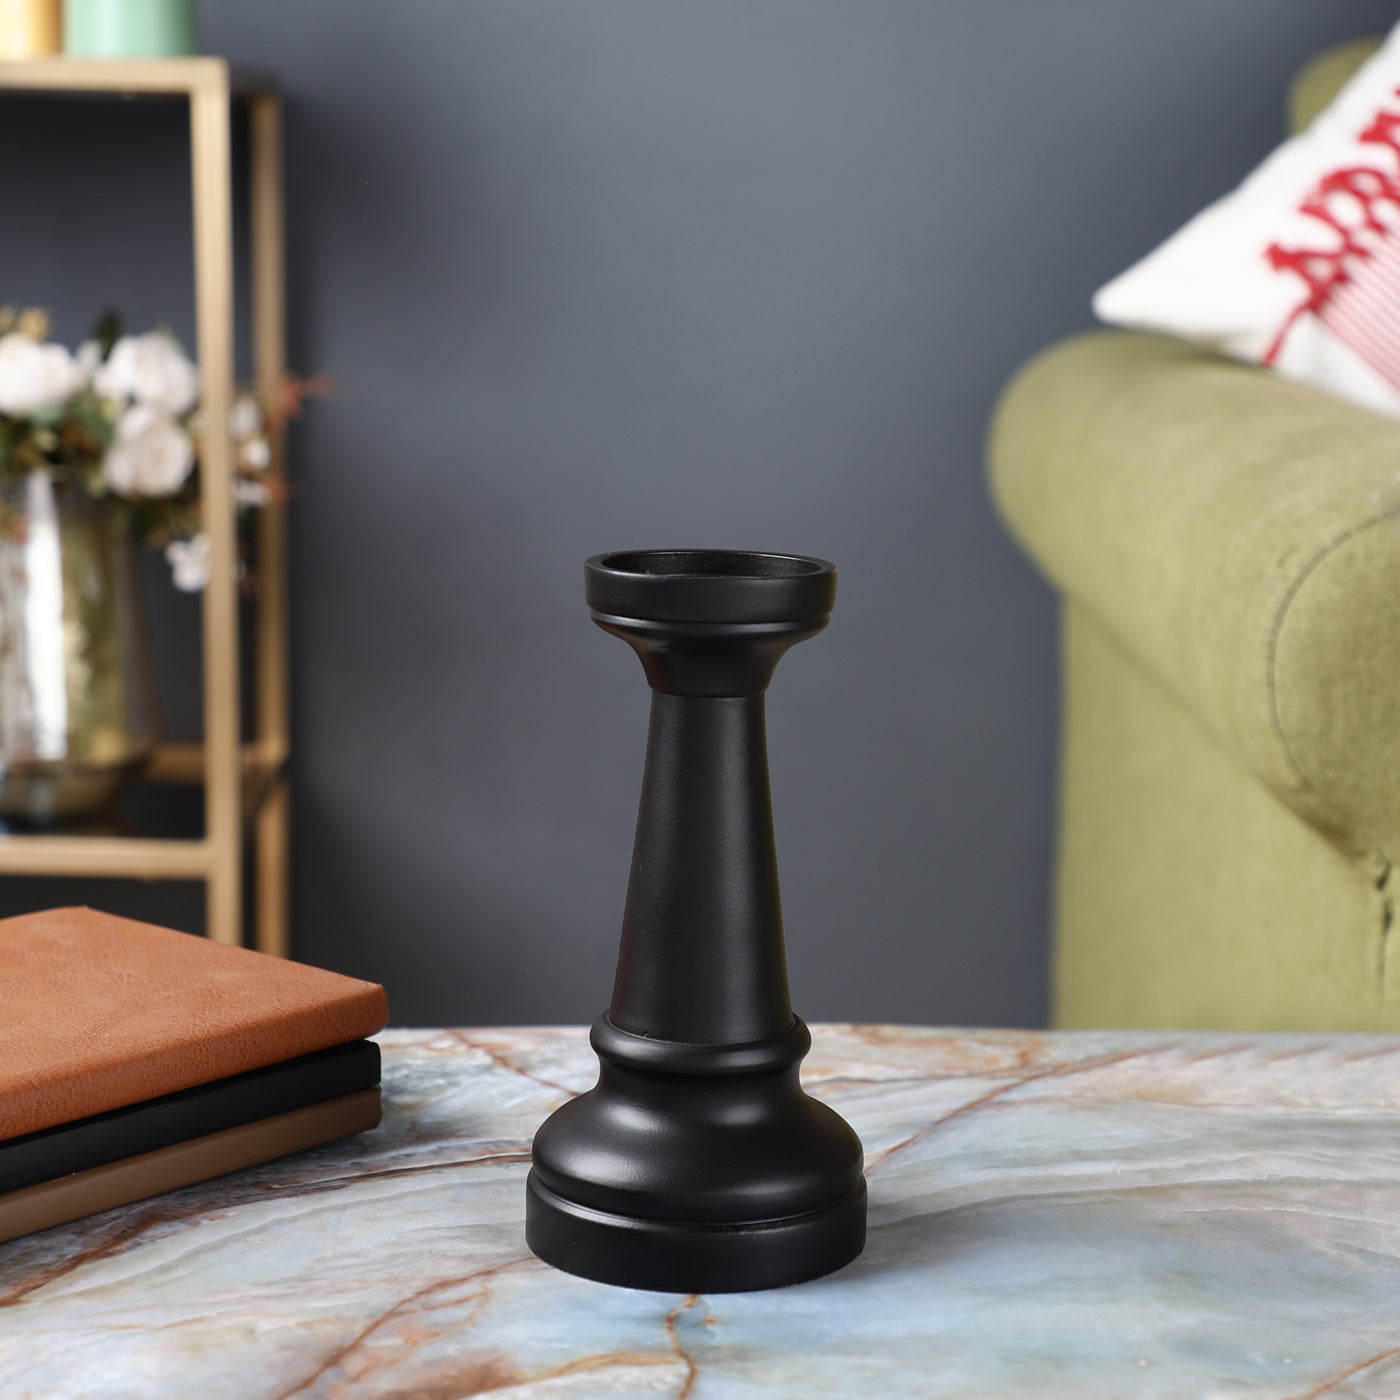 Chess Rook Black Over-Size